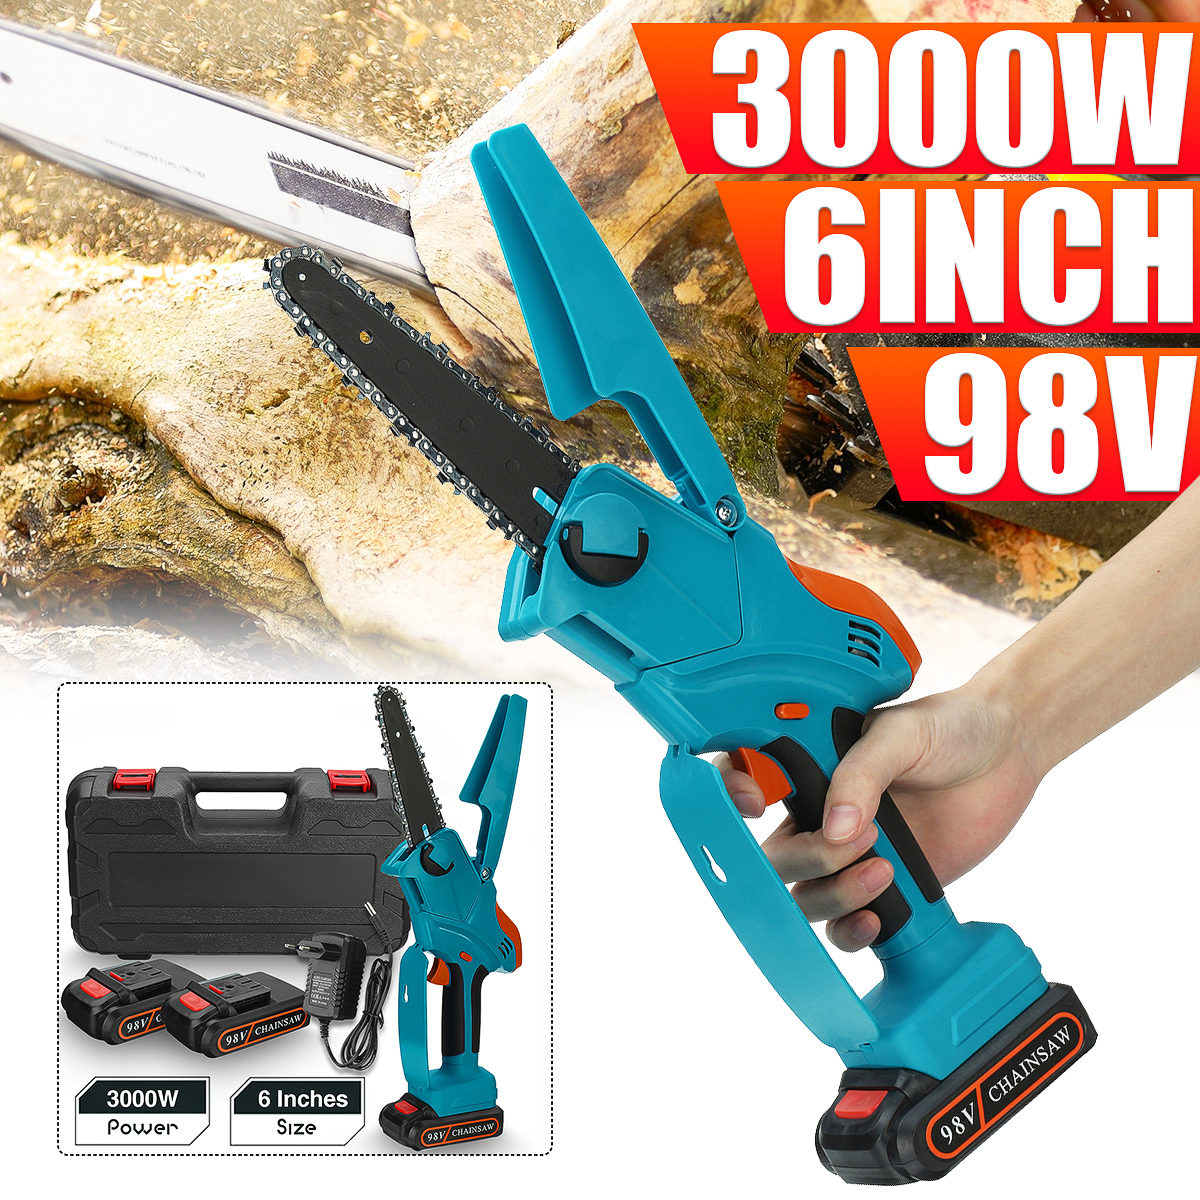 98VF-6-Inch-Portable-Electric-Saw-Pruning-Chain-Saw-Rechargeable-Woodworking-Power-Tools-Wood-Cutter-1917446-1